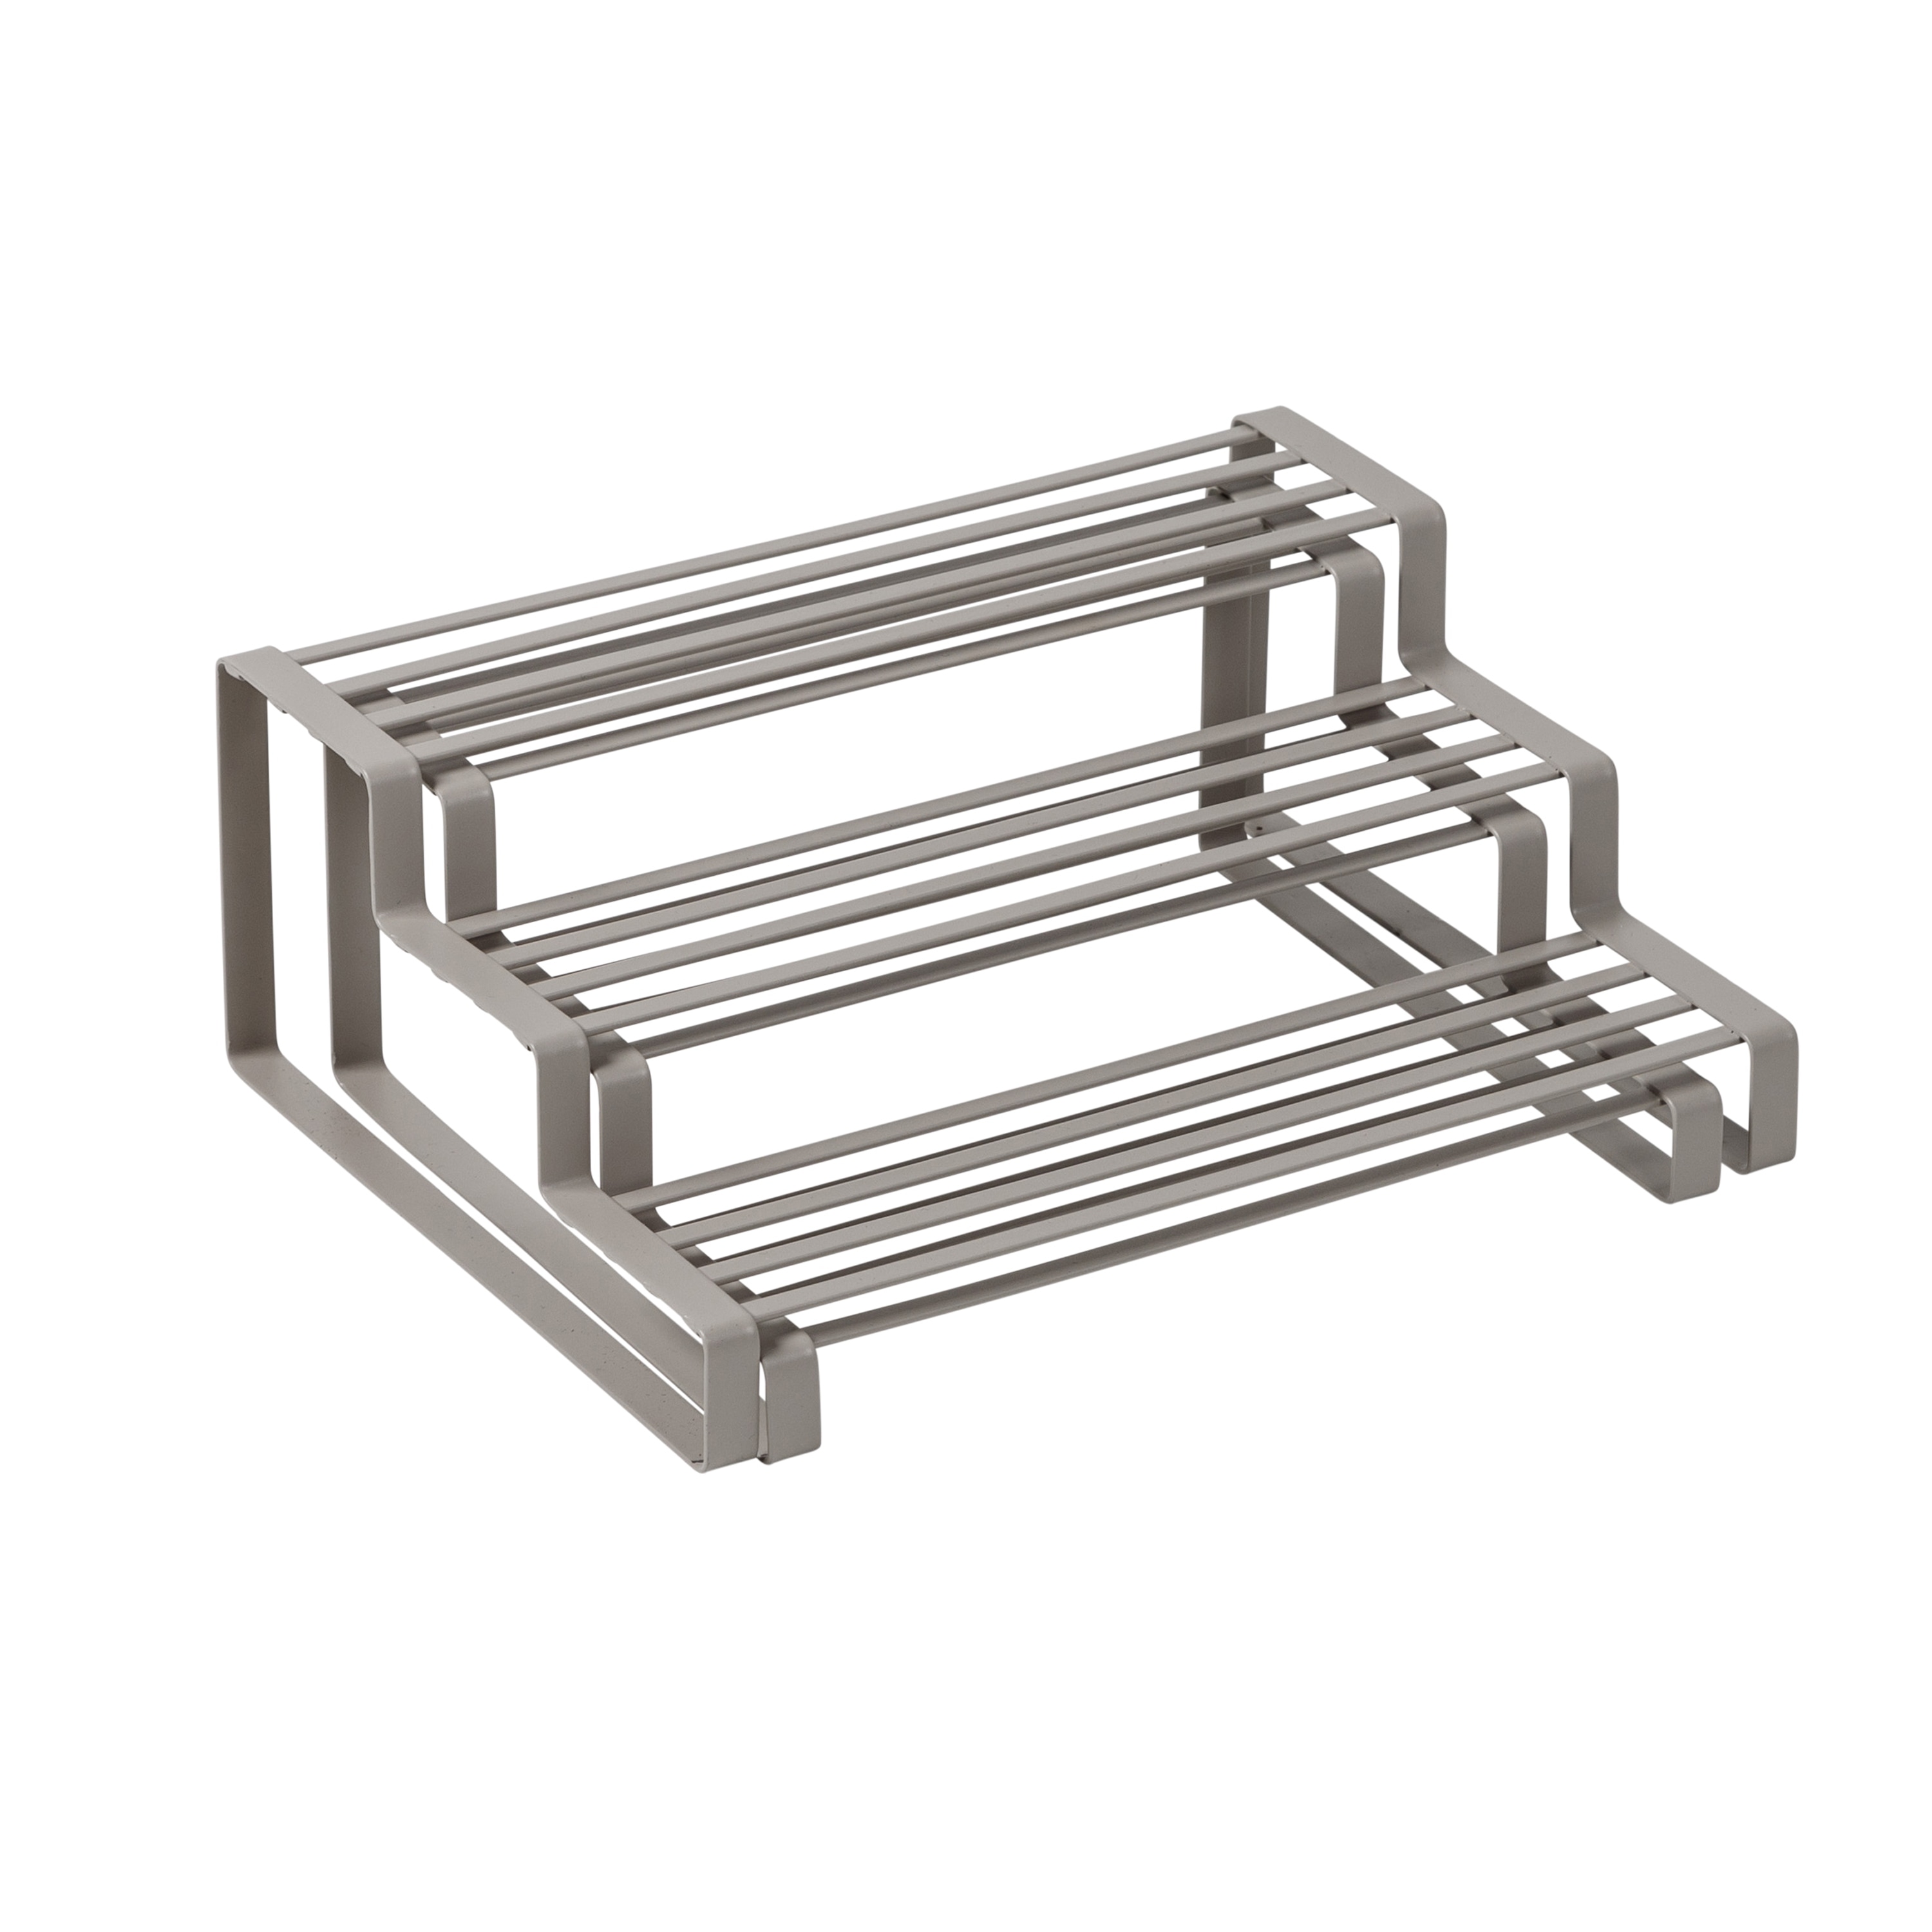 https://ak1.ostkcdn.com/images/products/is/images/direct/20493ba10c07623bd206968916fc8046ad920642/Grey-Steel-Expandable-3-Tier-Spice-Rack.jpg